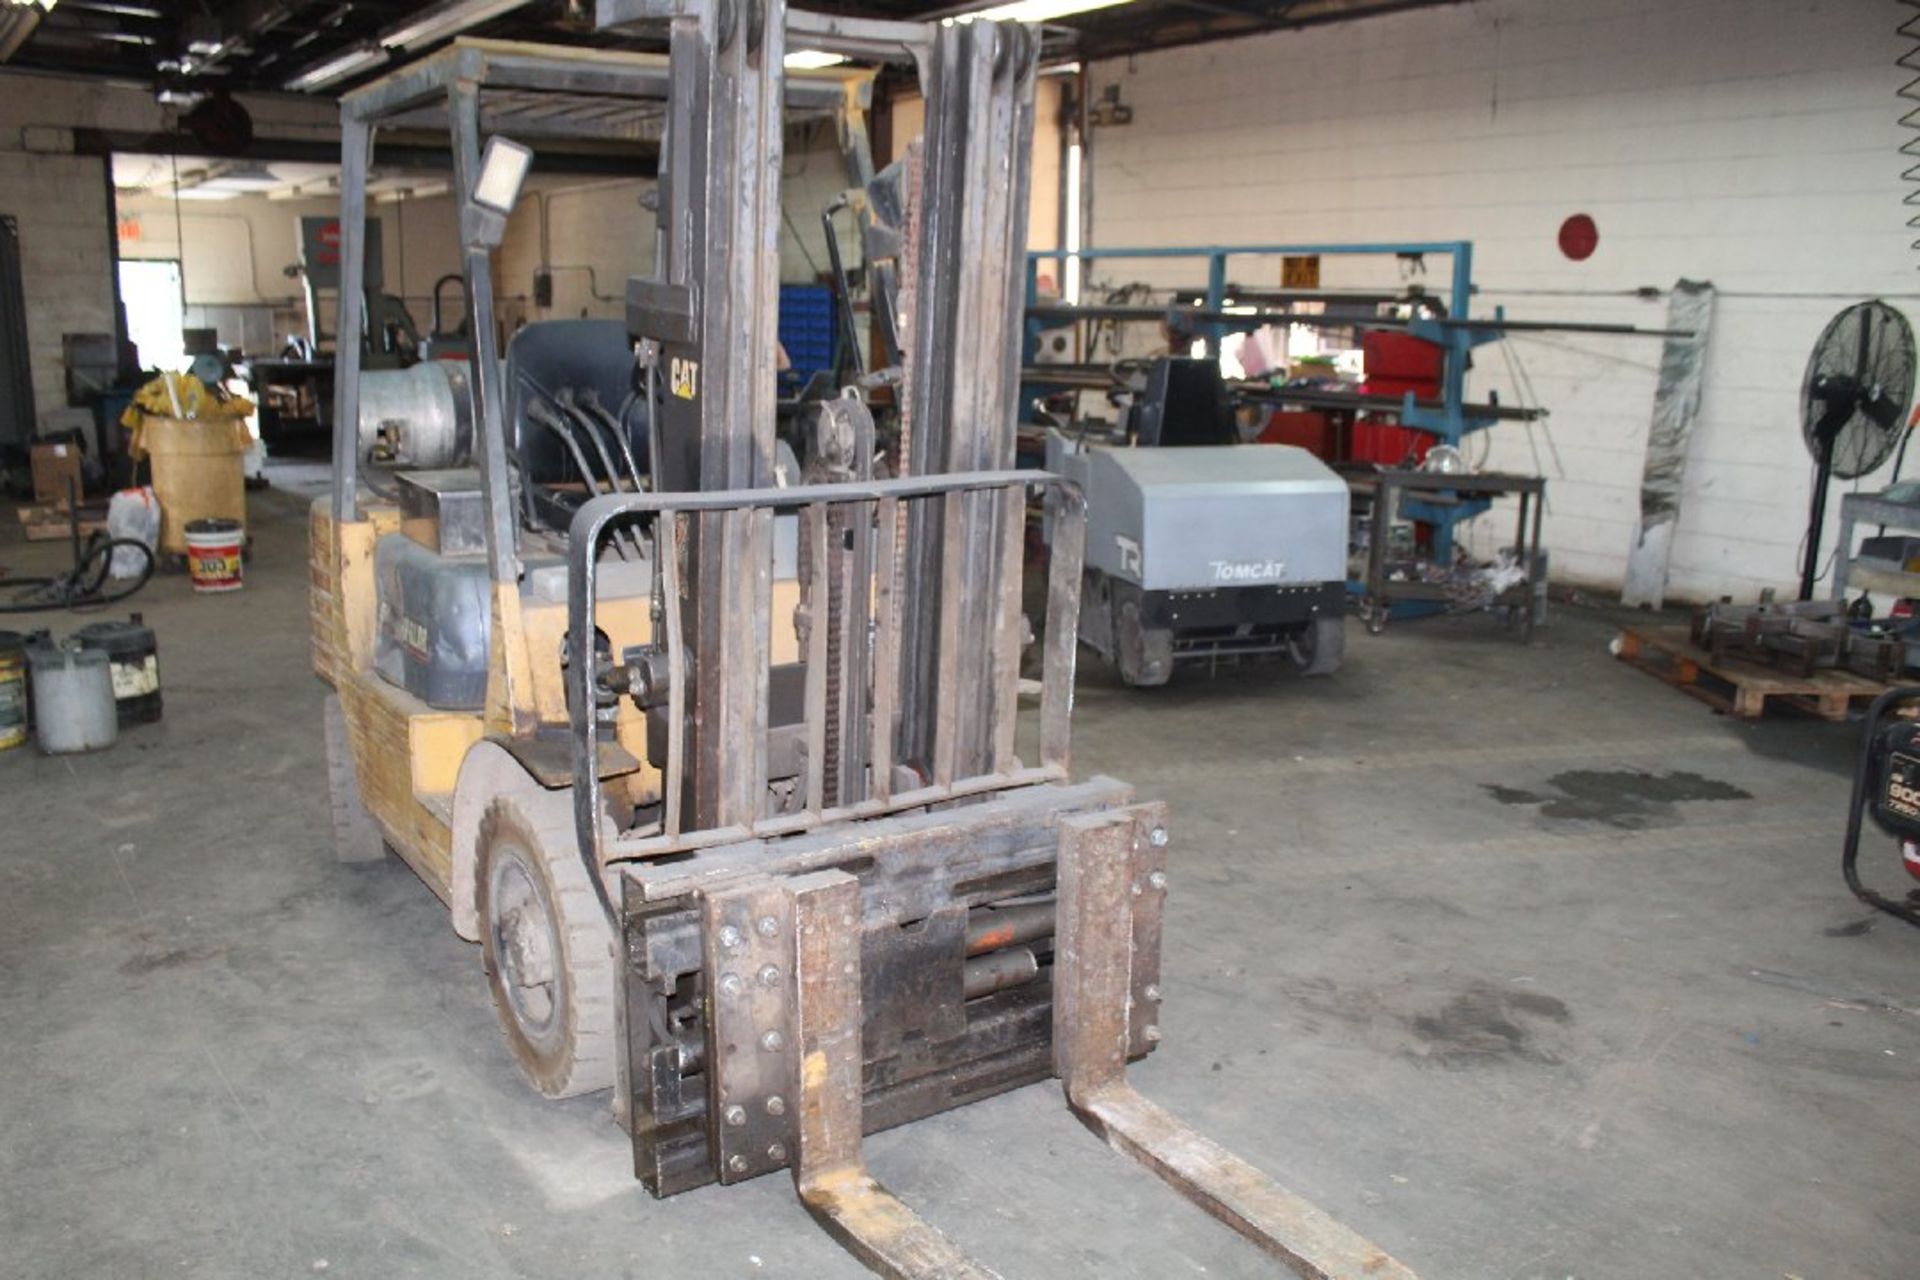 CAT Forklift, LP Gas, Pneumatic Tires (Good Condition), Model TP 25, 5,000 Pound Capacity, 138in - Image 2 of 3